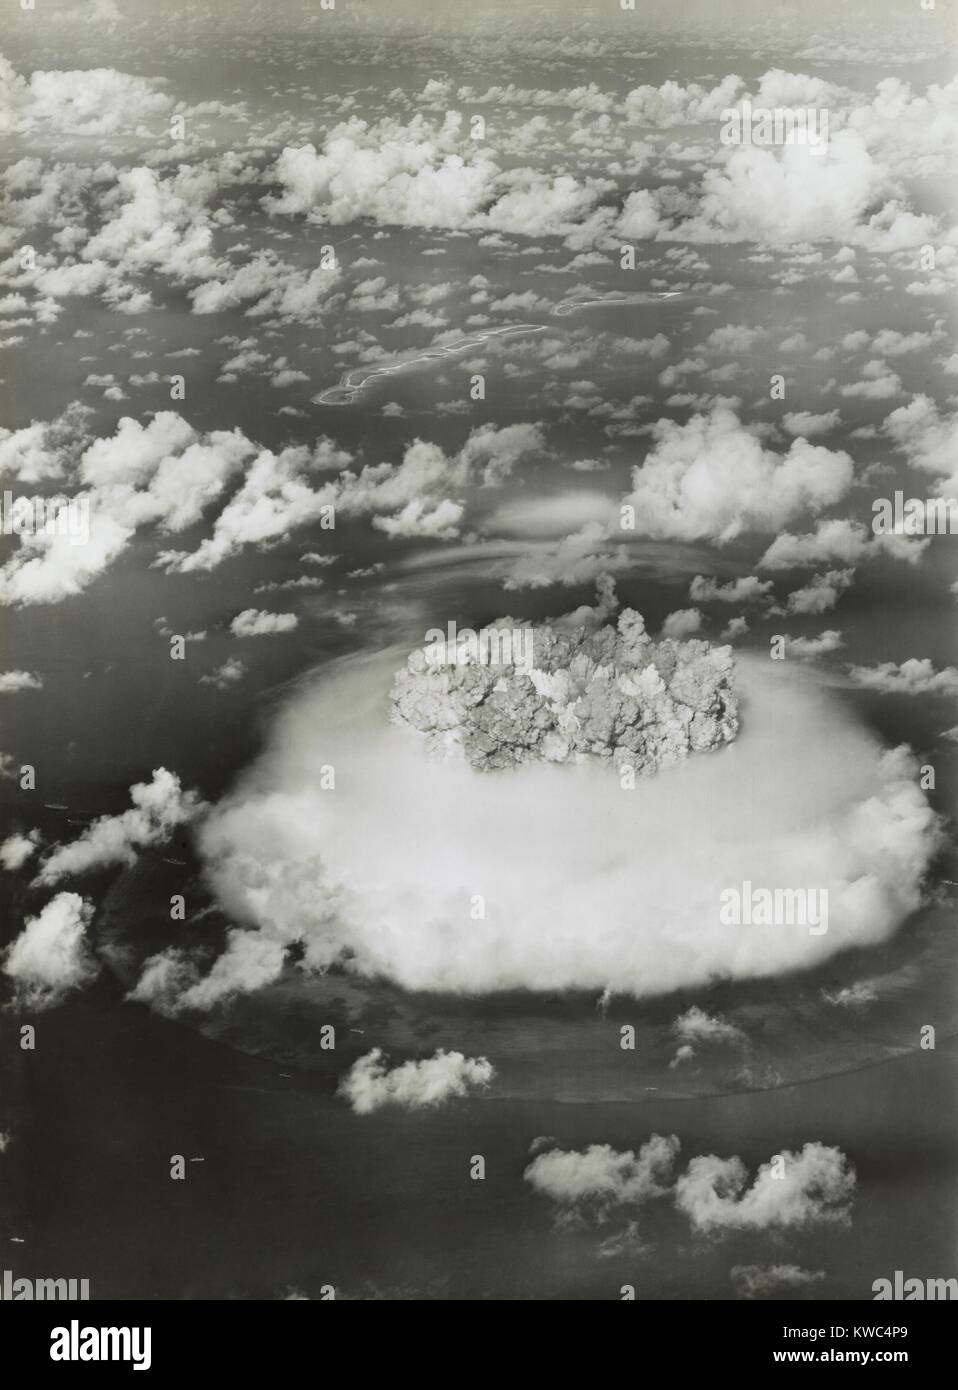 The BAKER test of Operation Crossroads, July 25, 1946. BAKER was exploded underwater, creating an underwater pressure of 1000 pounds per square inch. Operation Crossroads tested the effects of atomic weapons on ships at sea. The ABLE shot, detonated above the target was far less damaging than BAKER. BAKER created a tremendous underwater shock wave and deadly nuclear fall out. (BSLOC 2015 2 5) Stock Photo